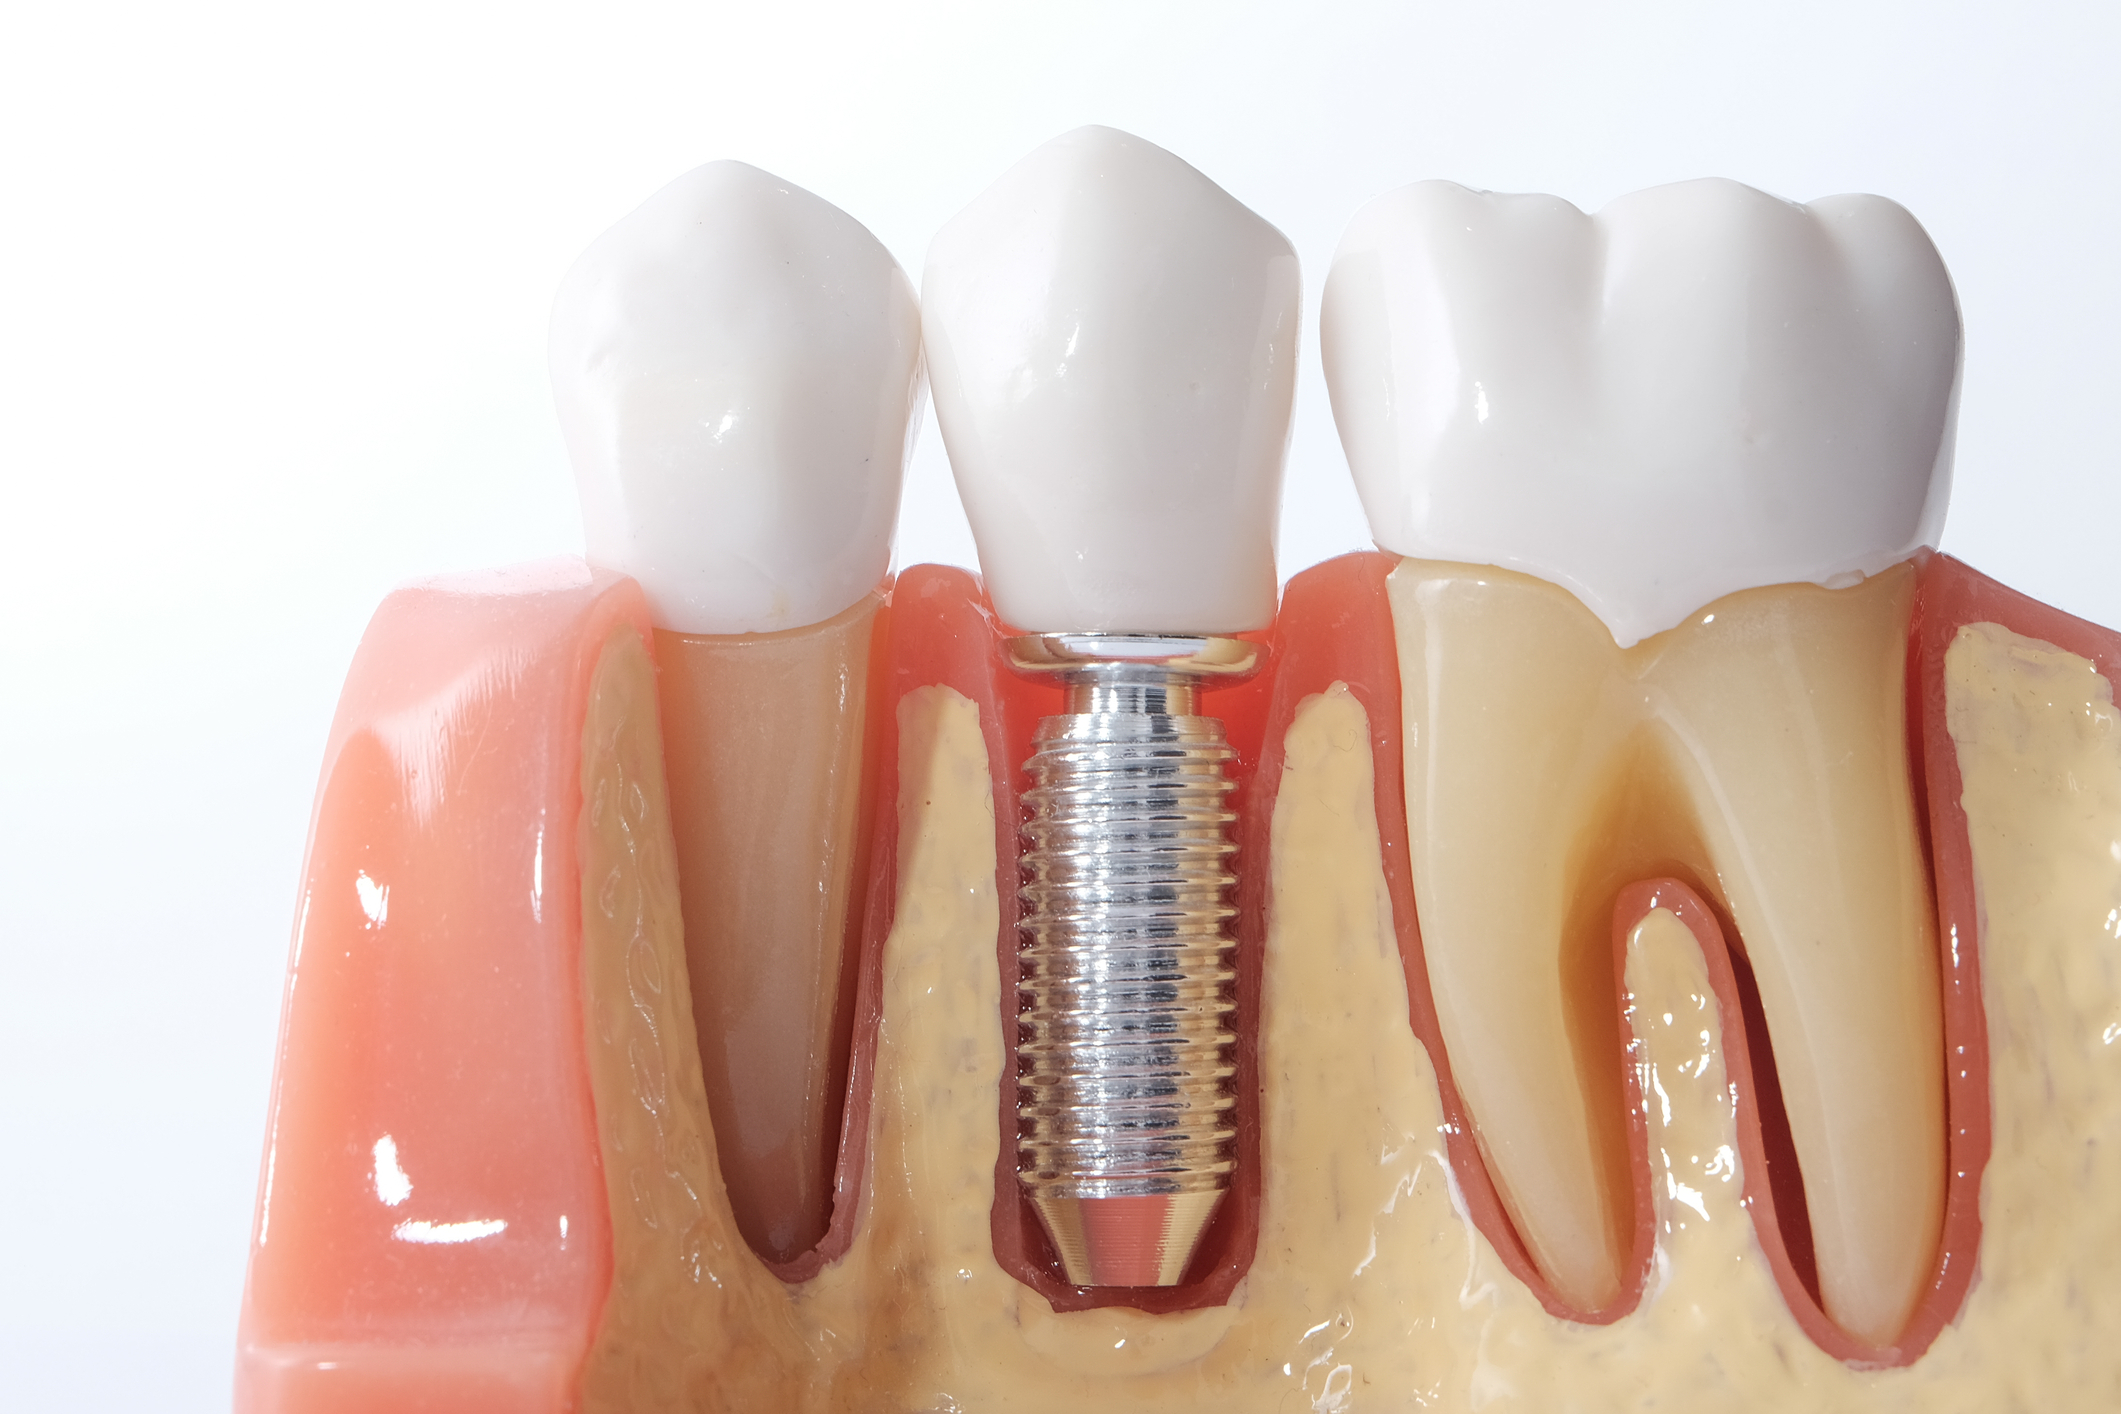 a model of dental implants that would be shown at airdrie dental